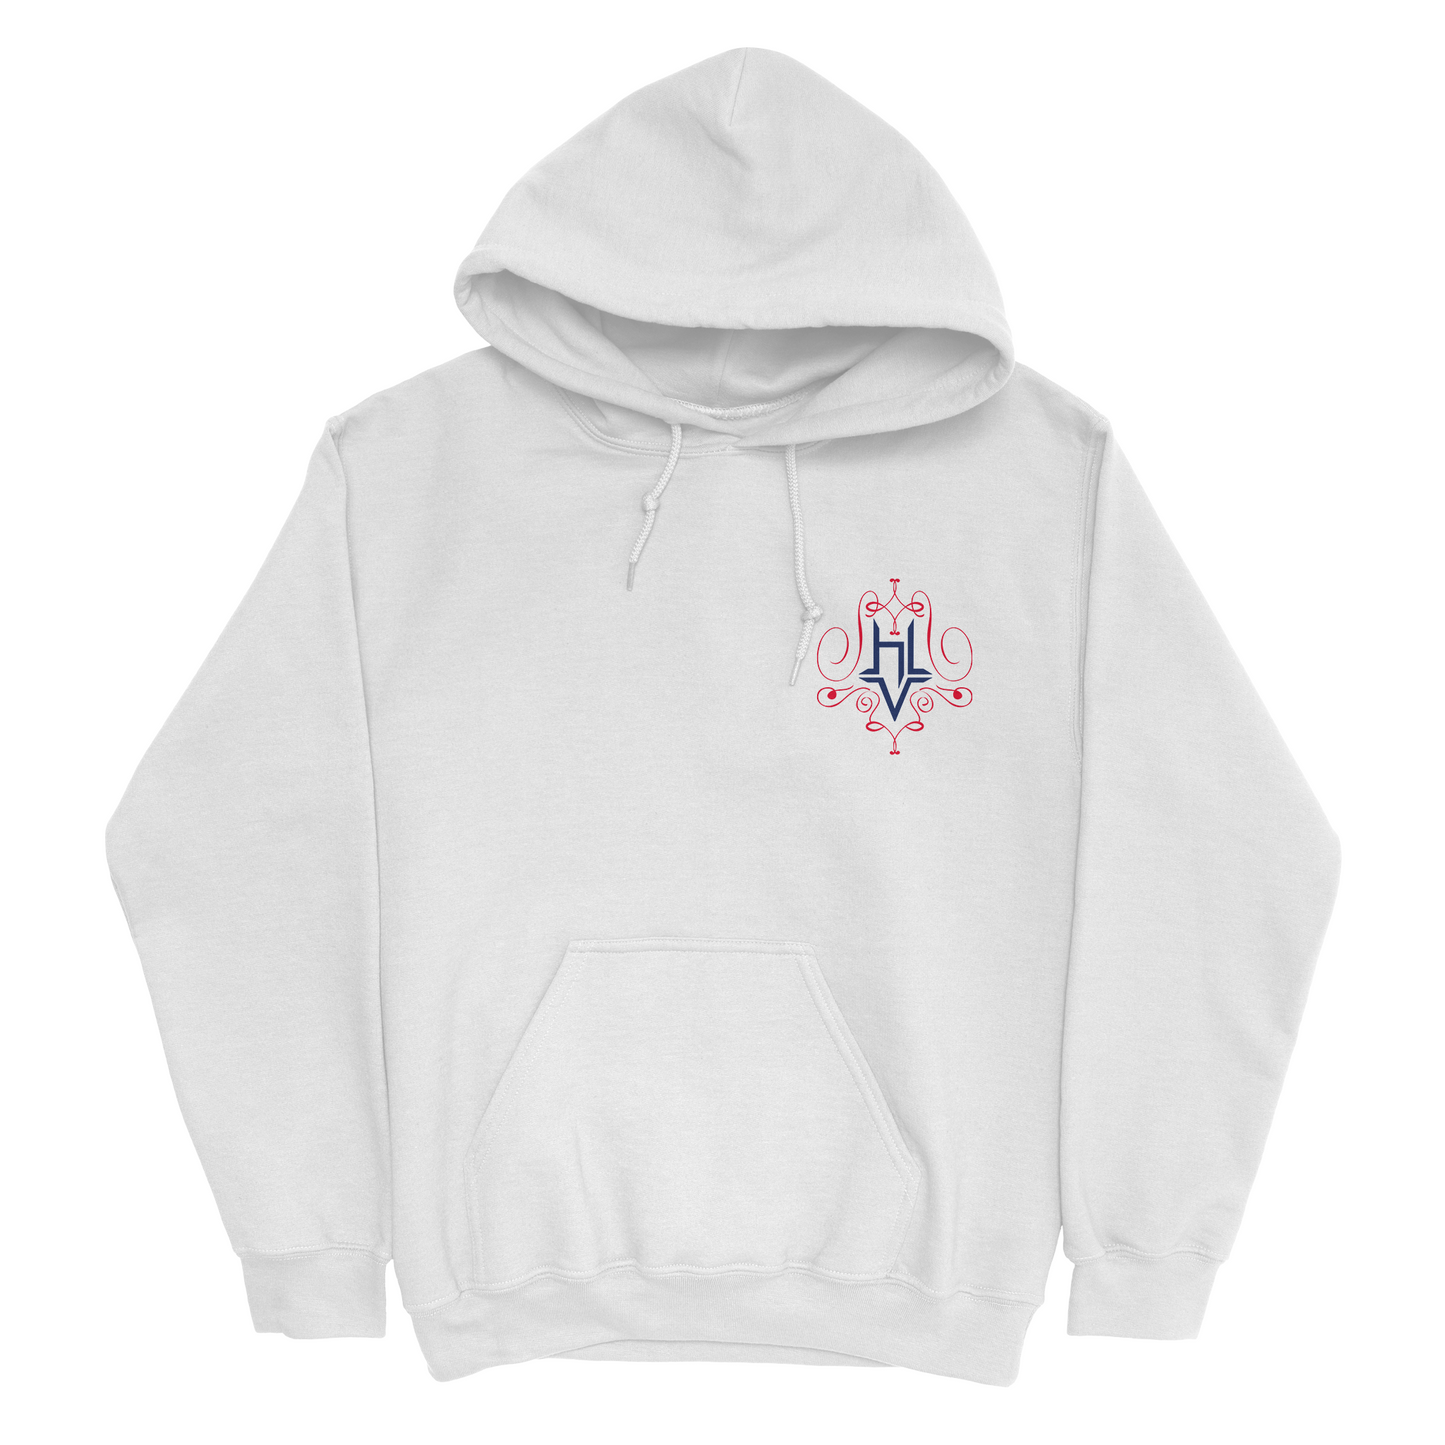 EXCLUSIVE RELEASE: Hailey Van Lith - Red White and Blue Script Logo Hoodie